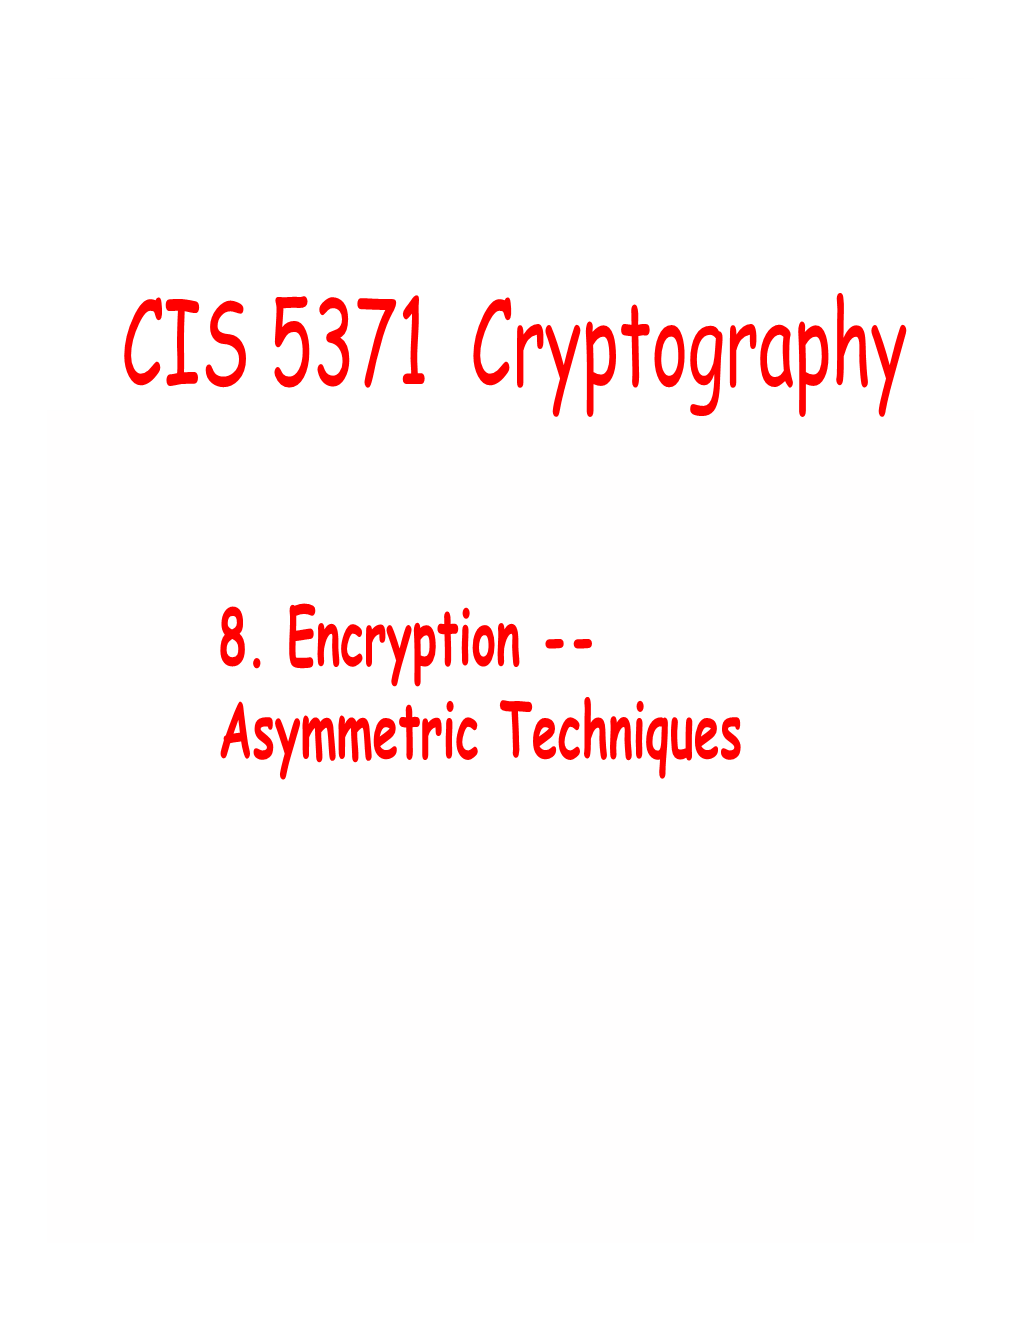 CIS 5371 Cryptography Yp G